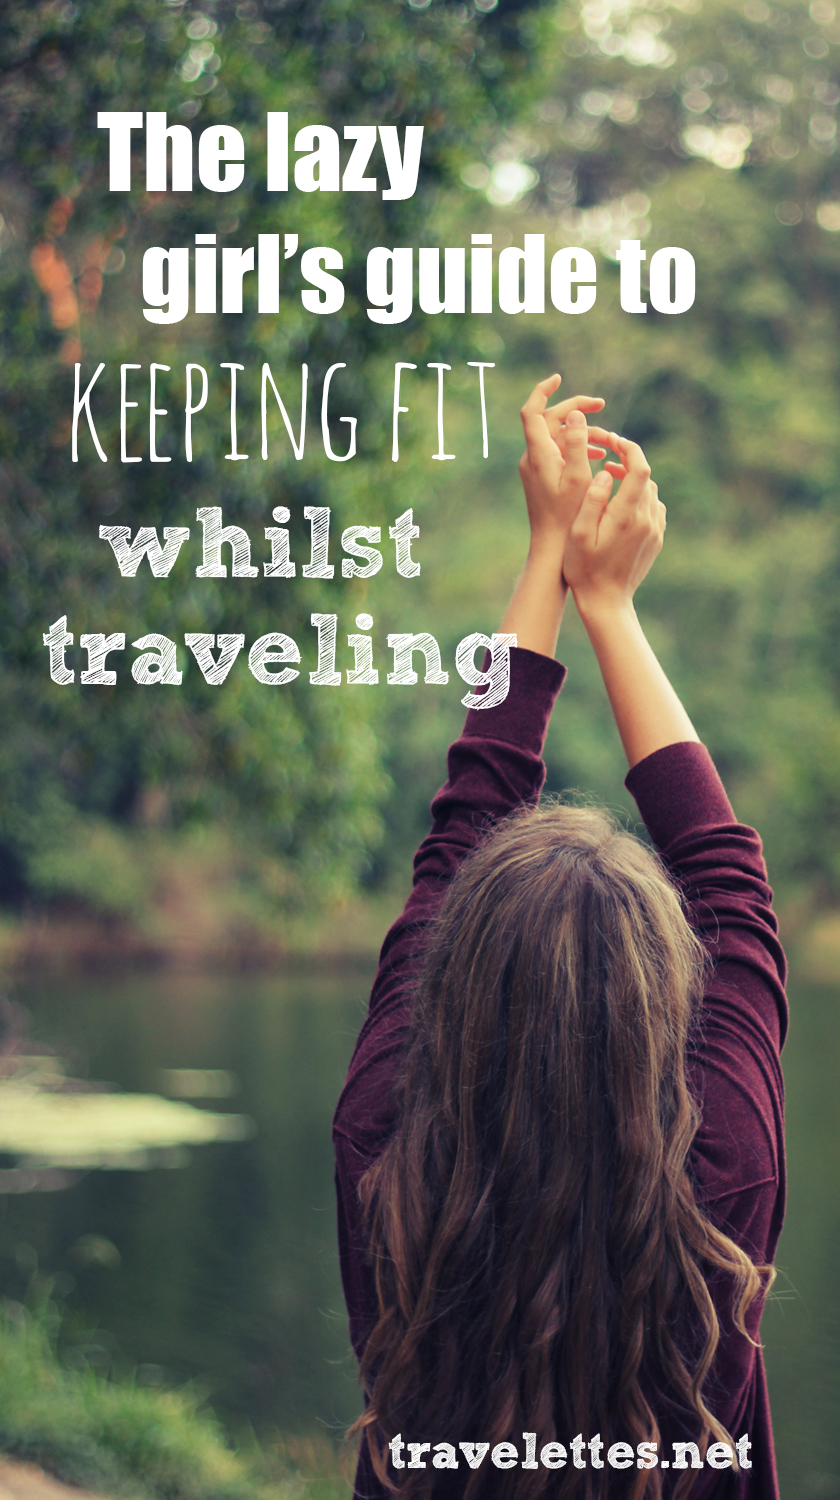 The lazy girl’s guide to keeping fit when traveling